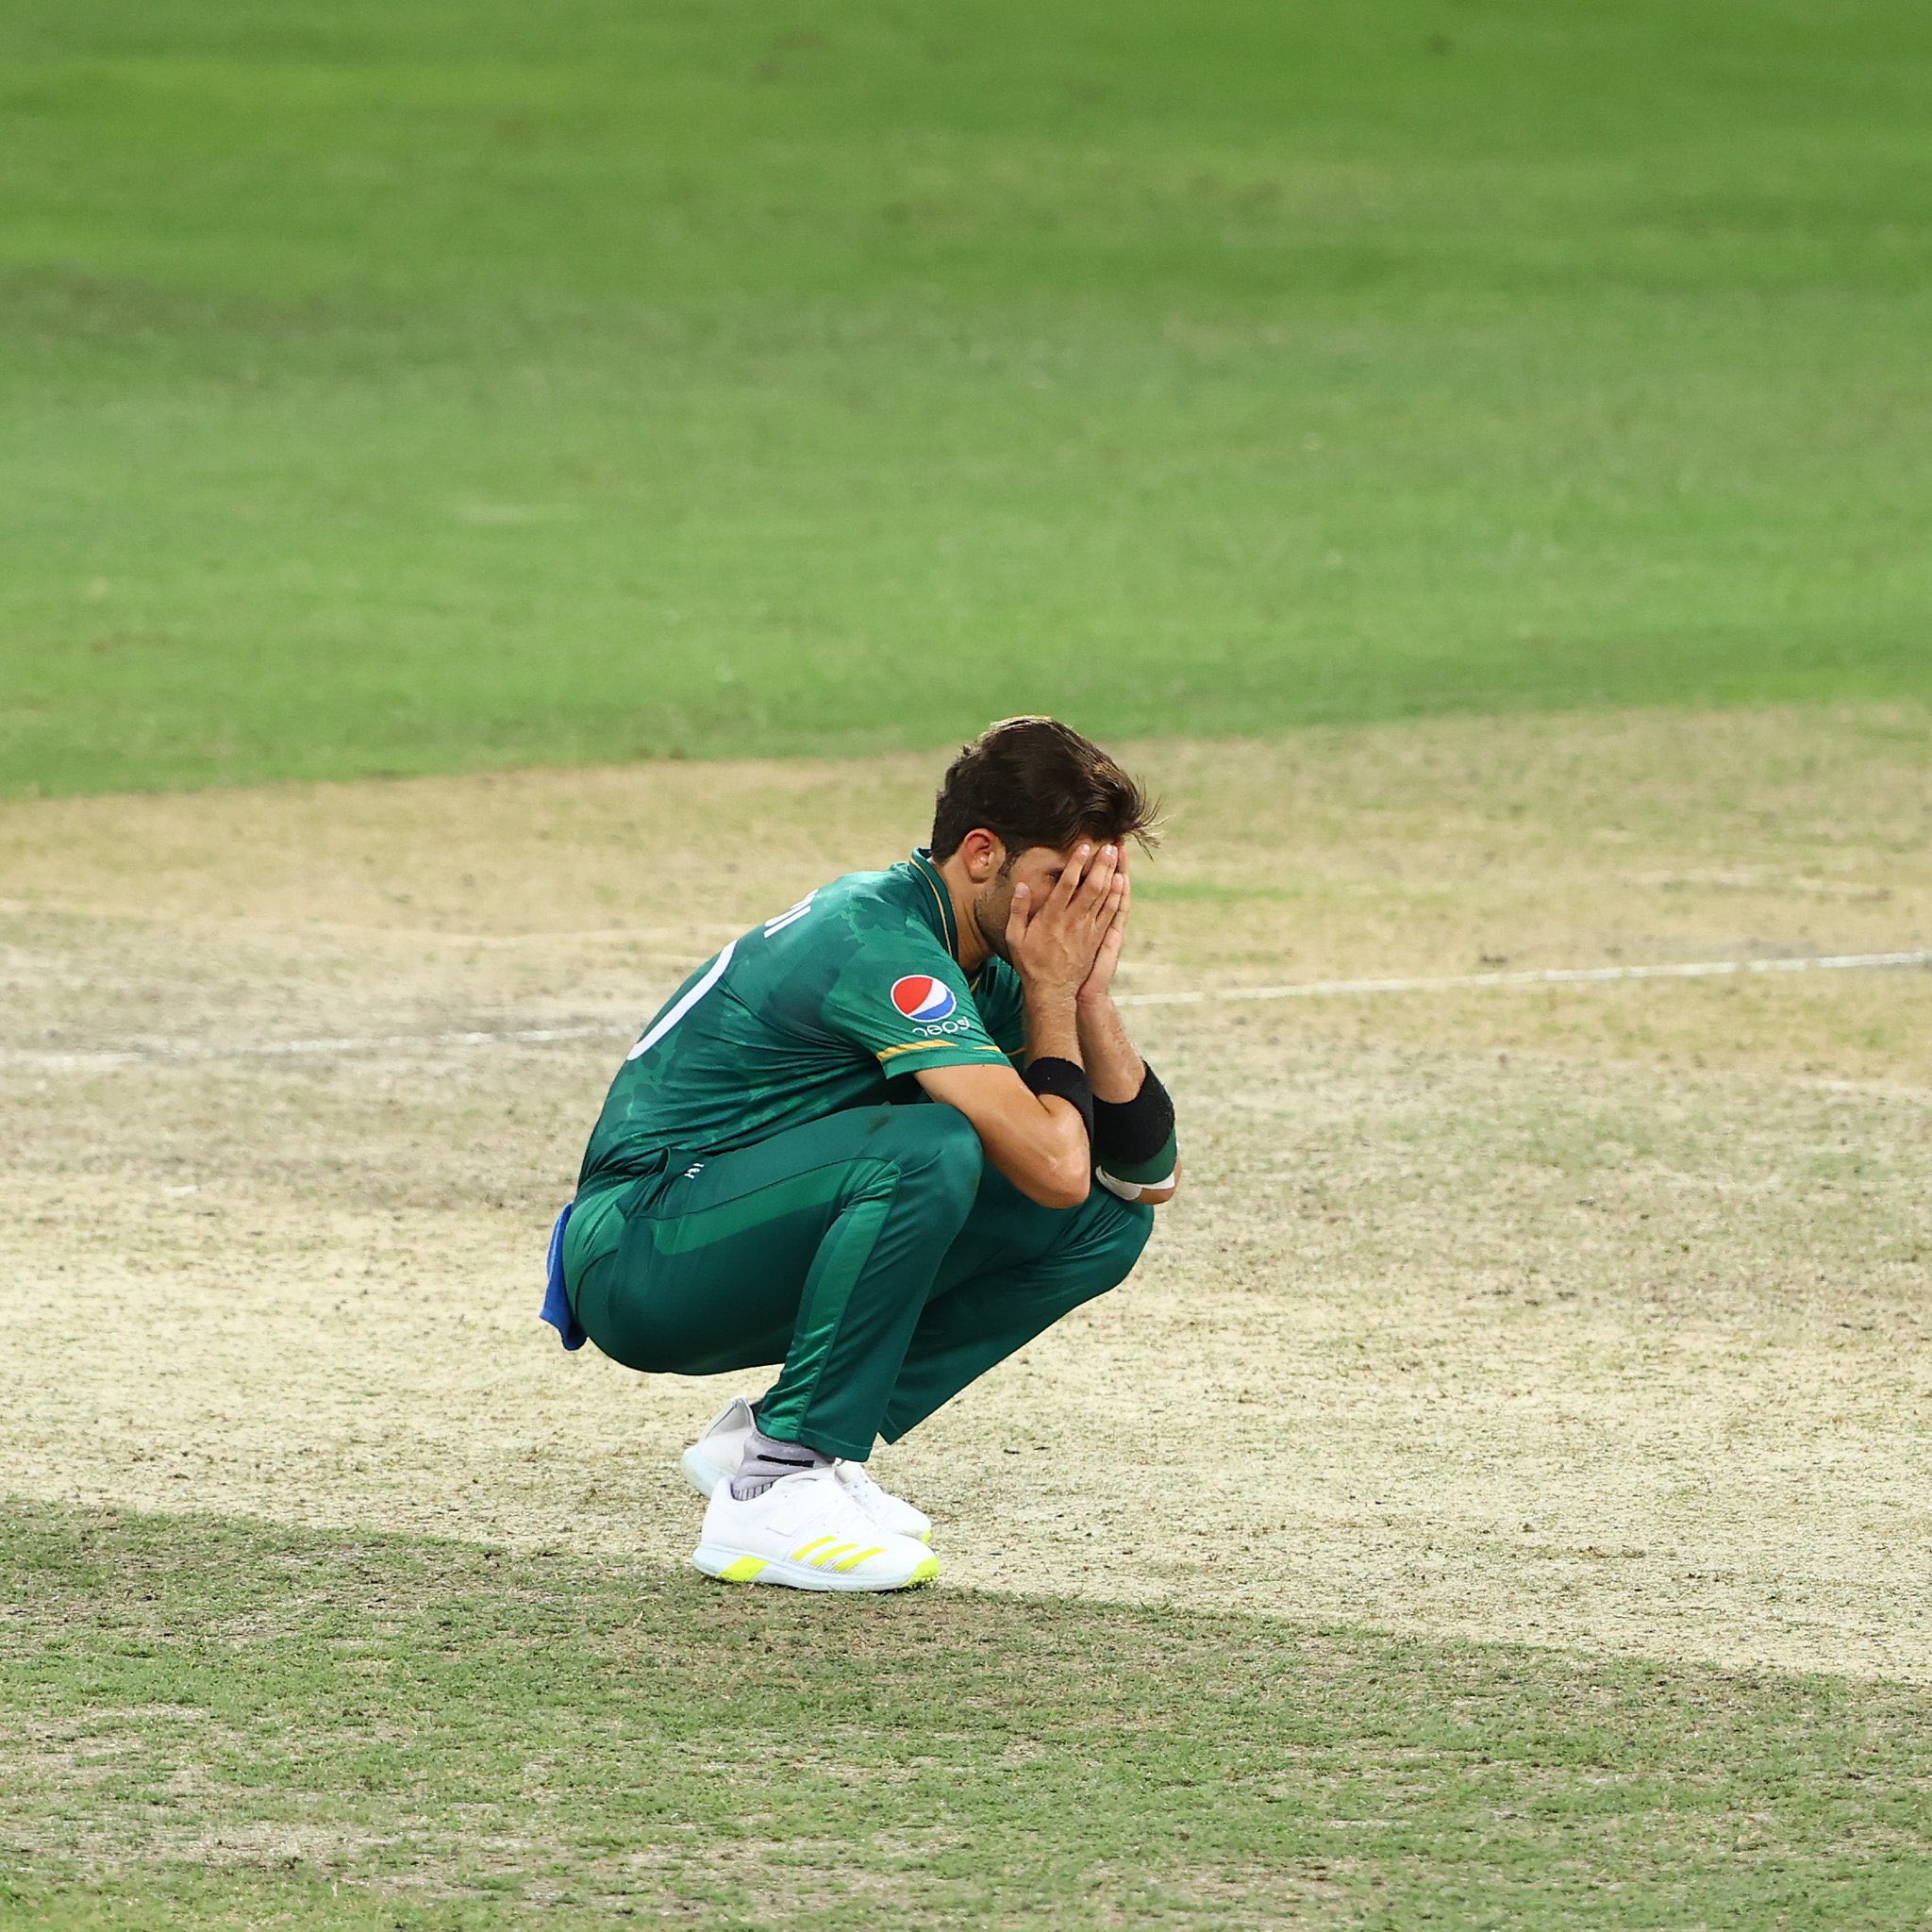 Hasan Ali has apologised to fans after Pakistan's T20 World Cup exit